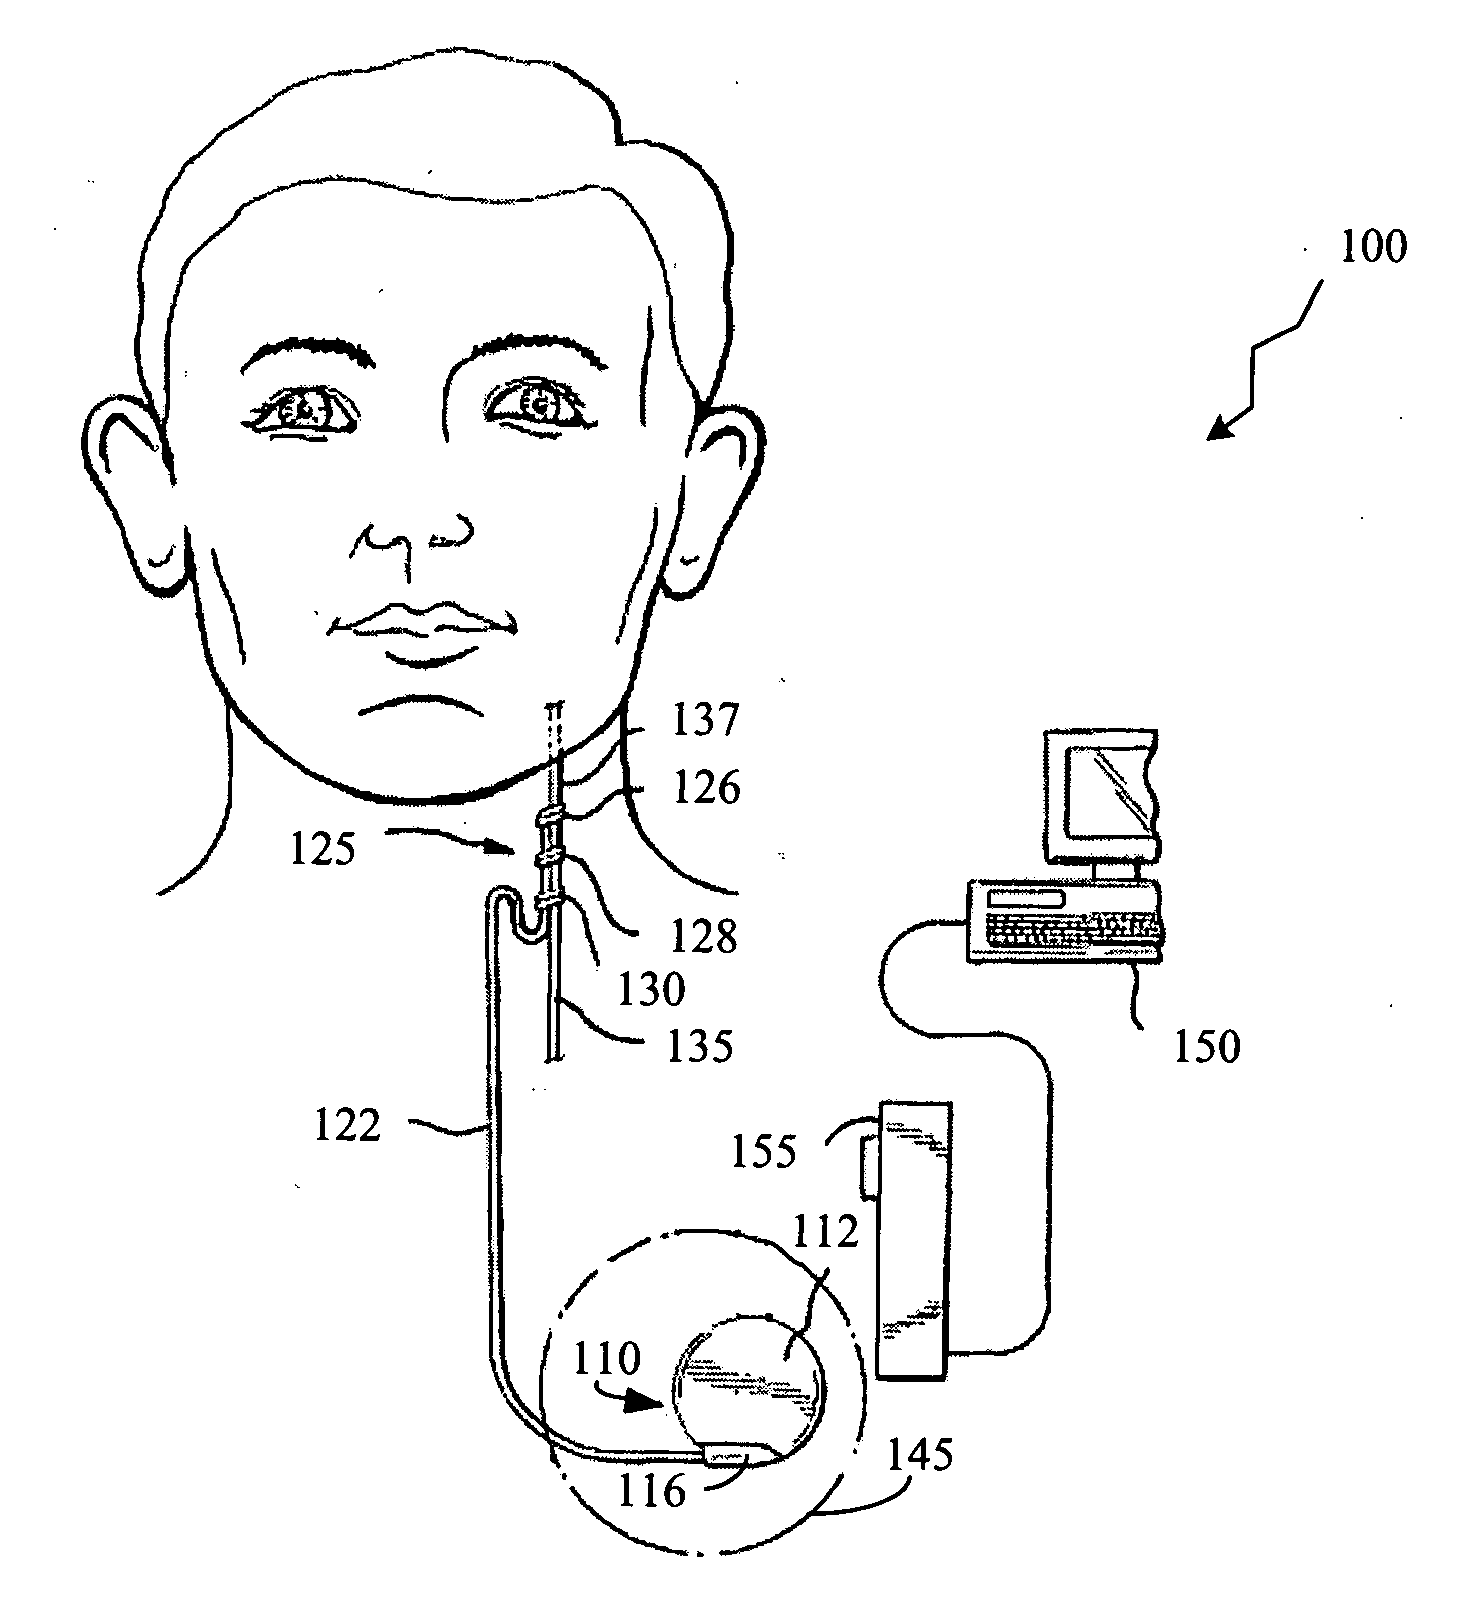 Patient management system for providing parameter data for an implantable medical device